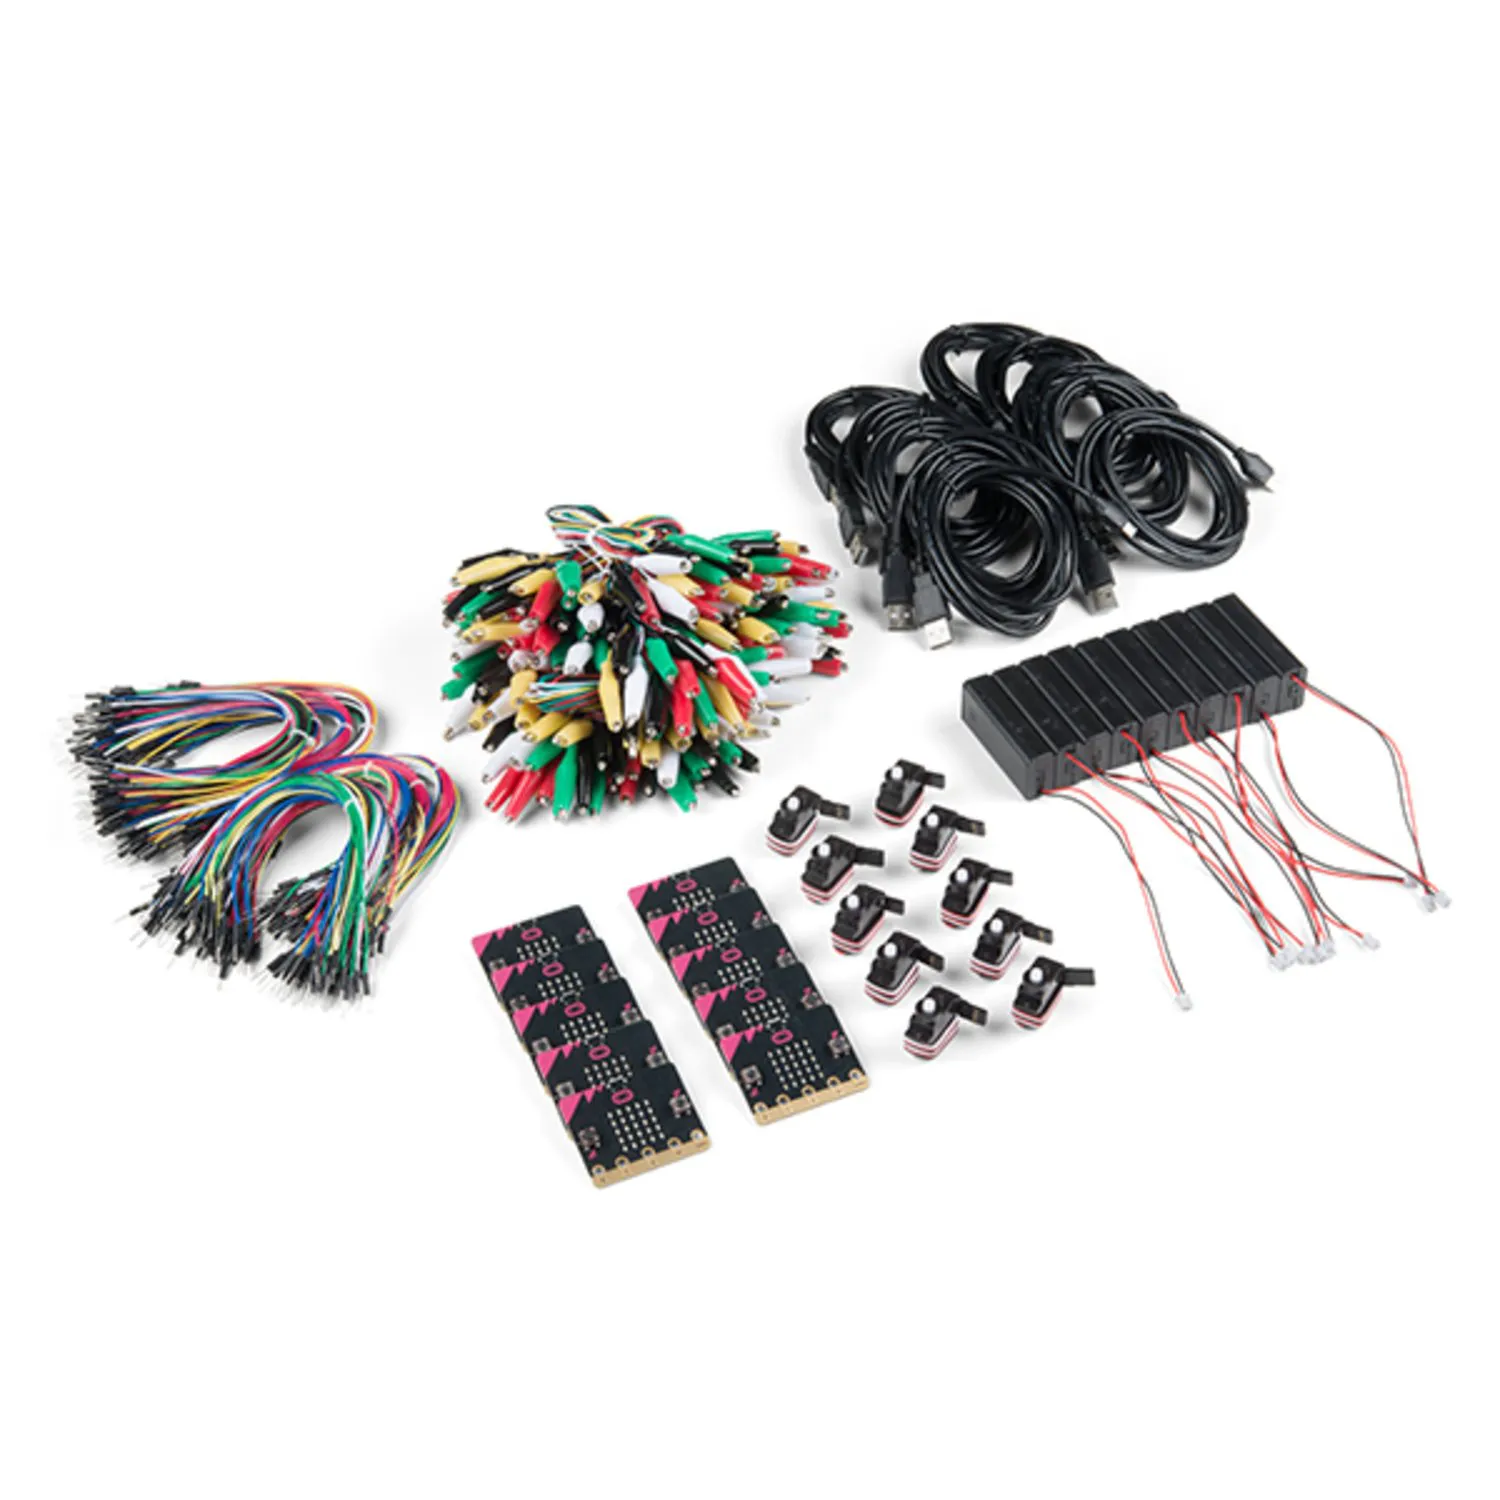 Photo of SparkFun Educator Lab Pack for micro:bit v2